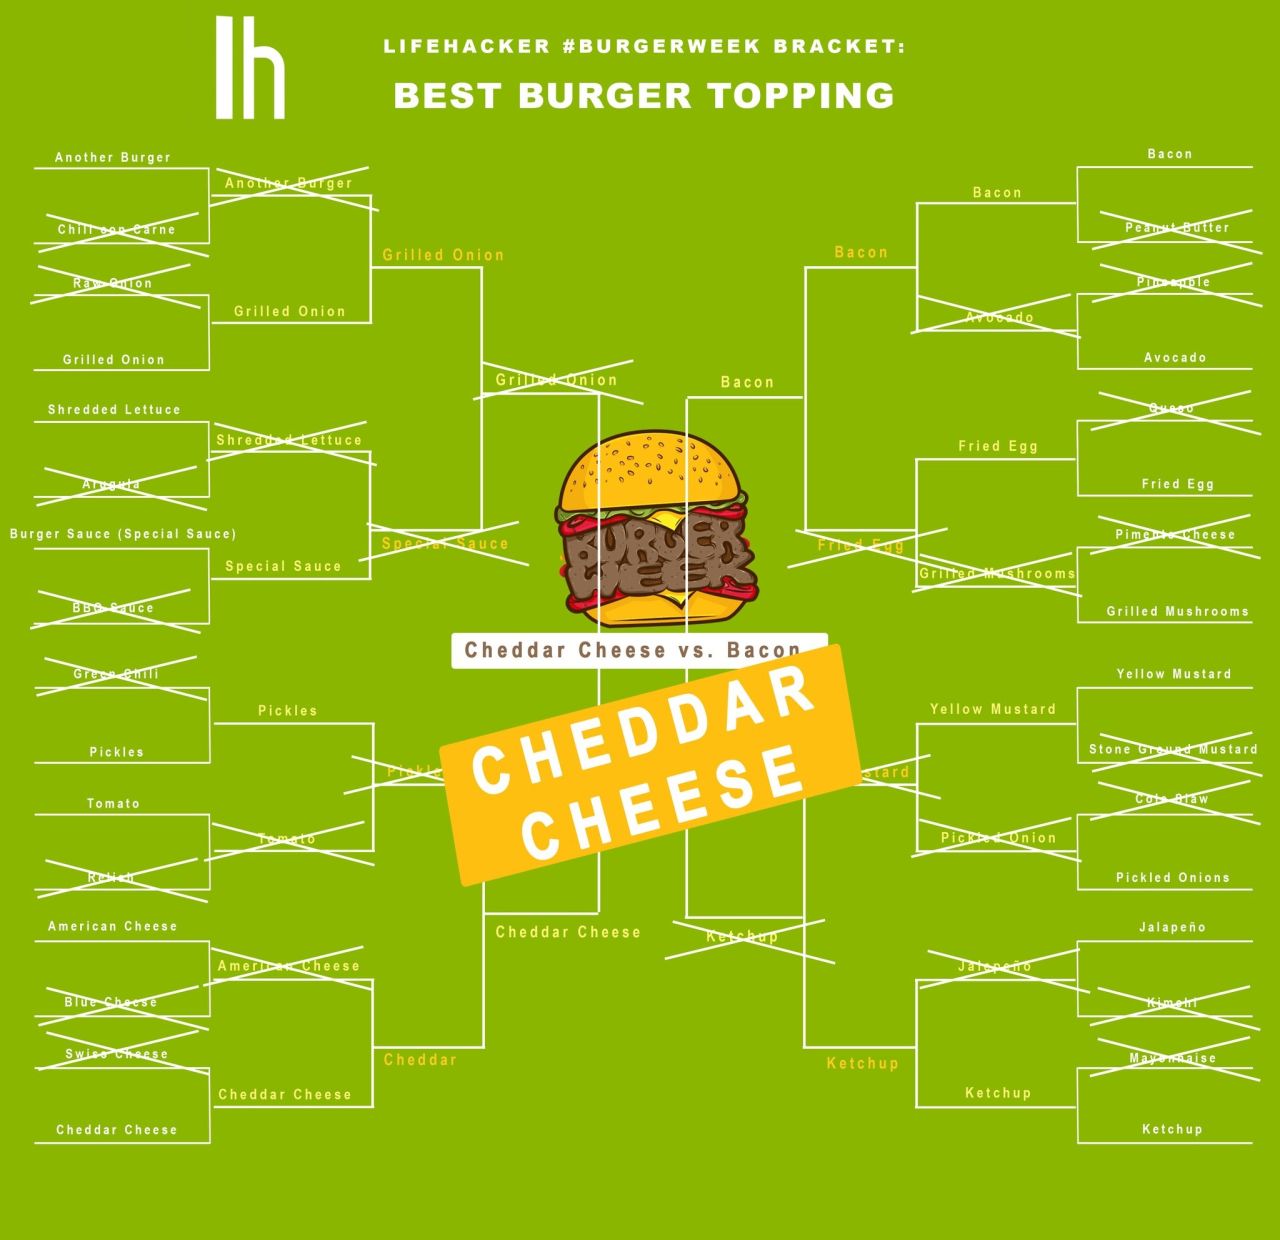 The #1 Burger Topping, According To Lifehacker Readers